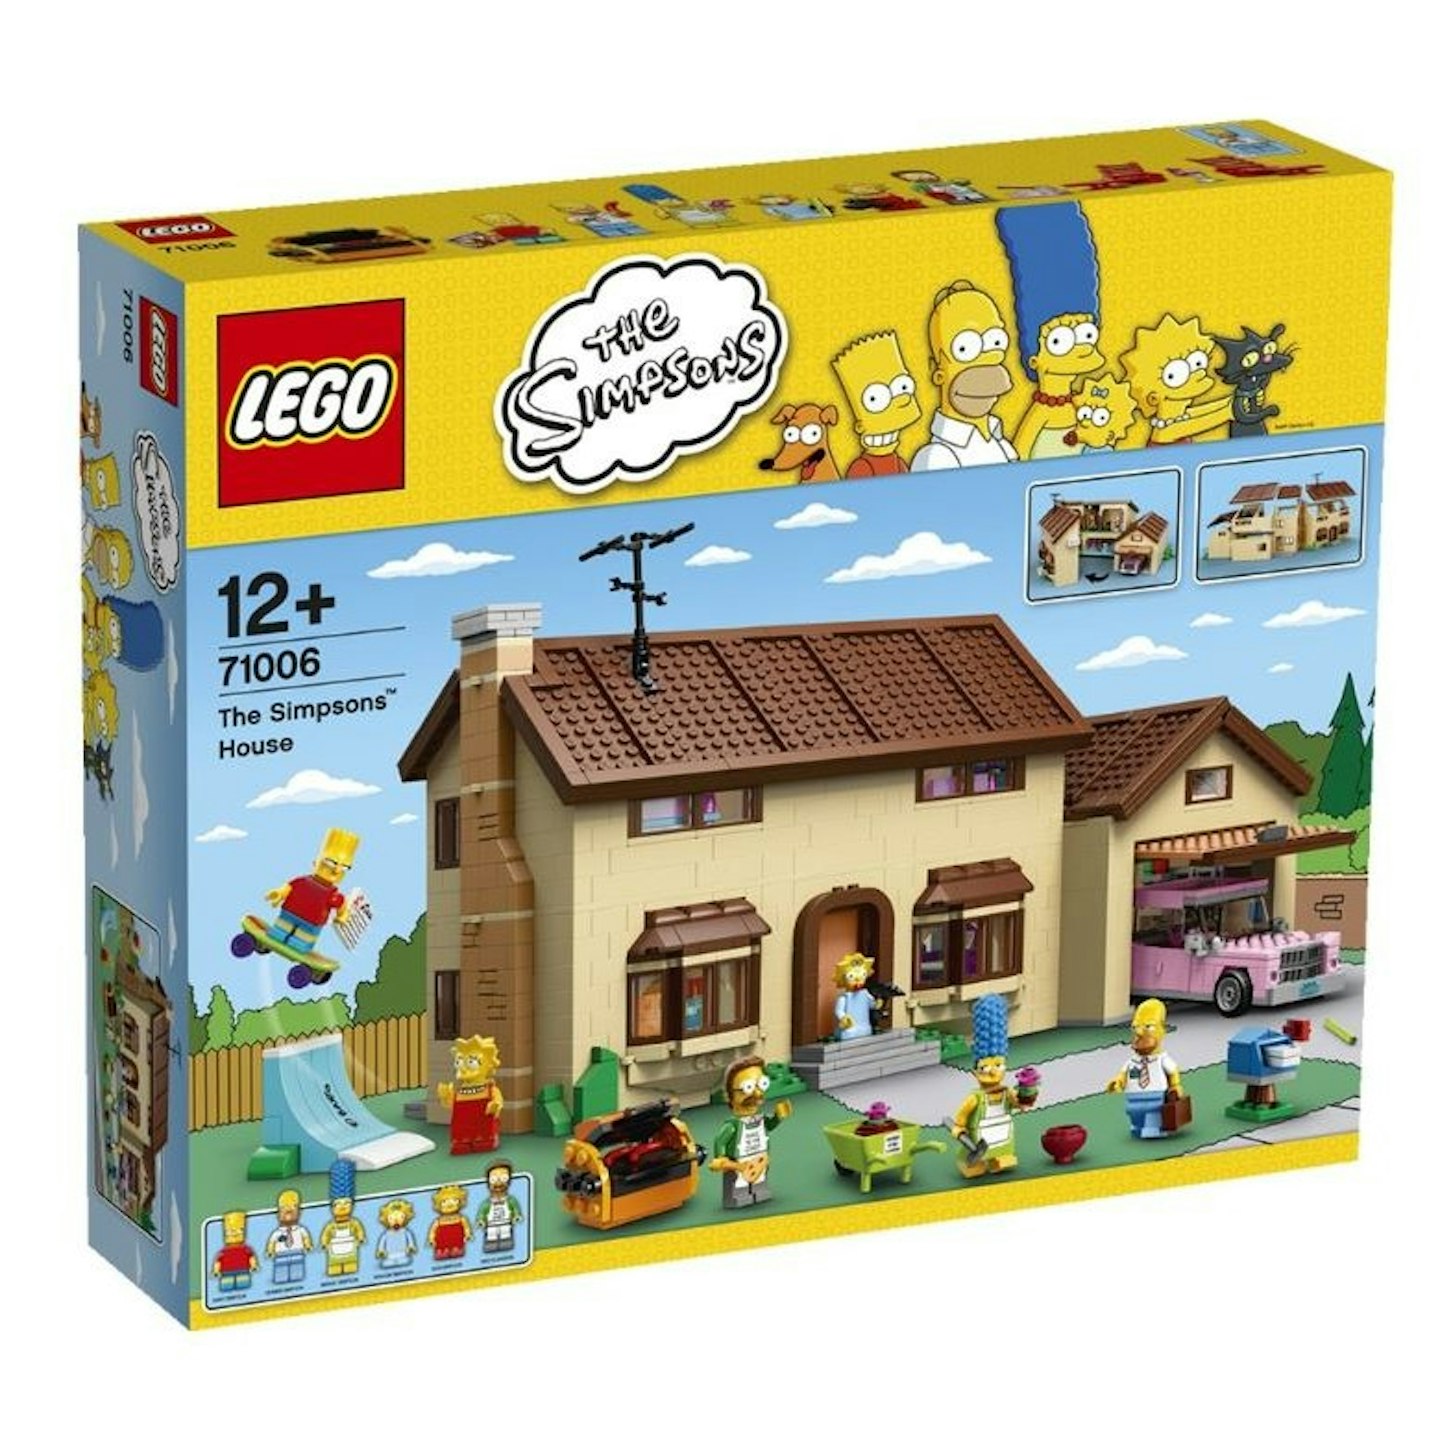 The Simpsons House, £349.90